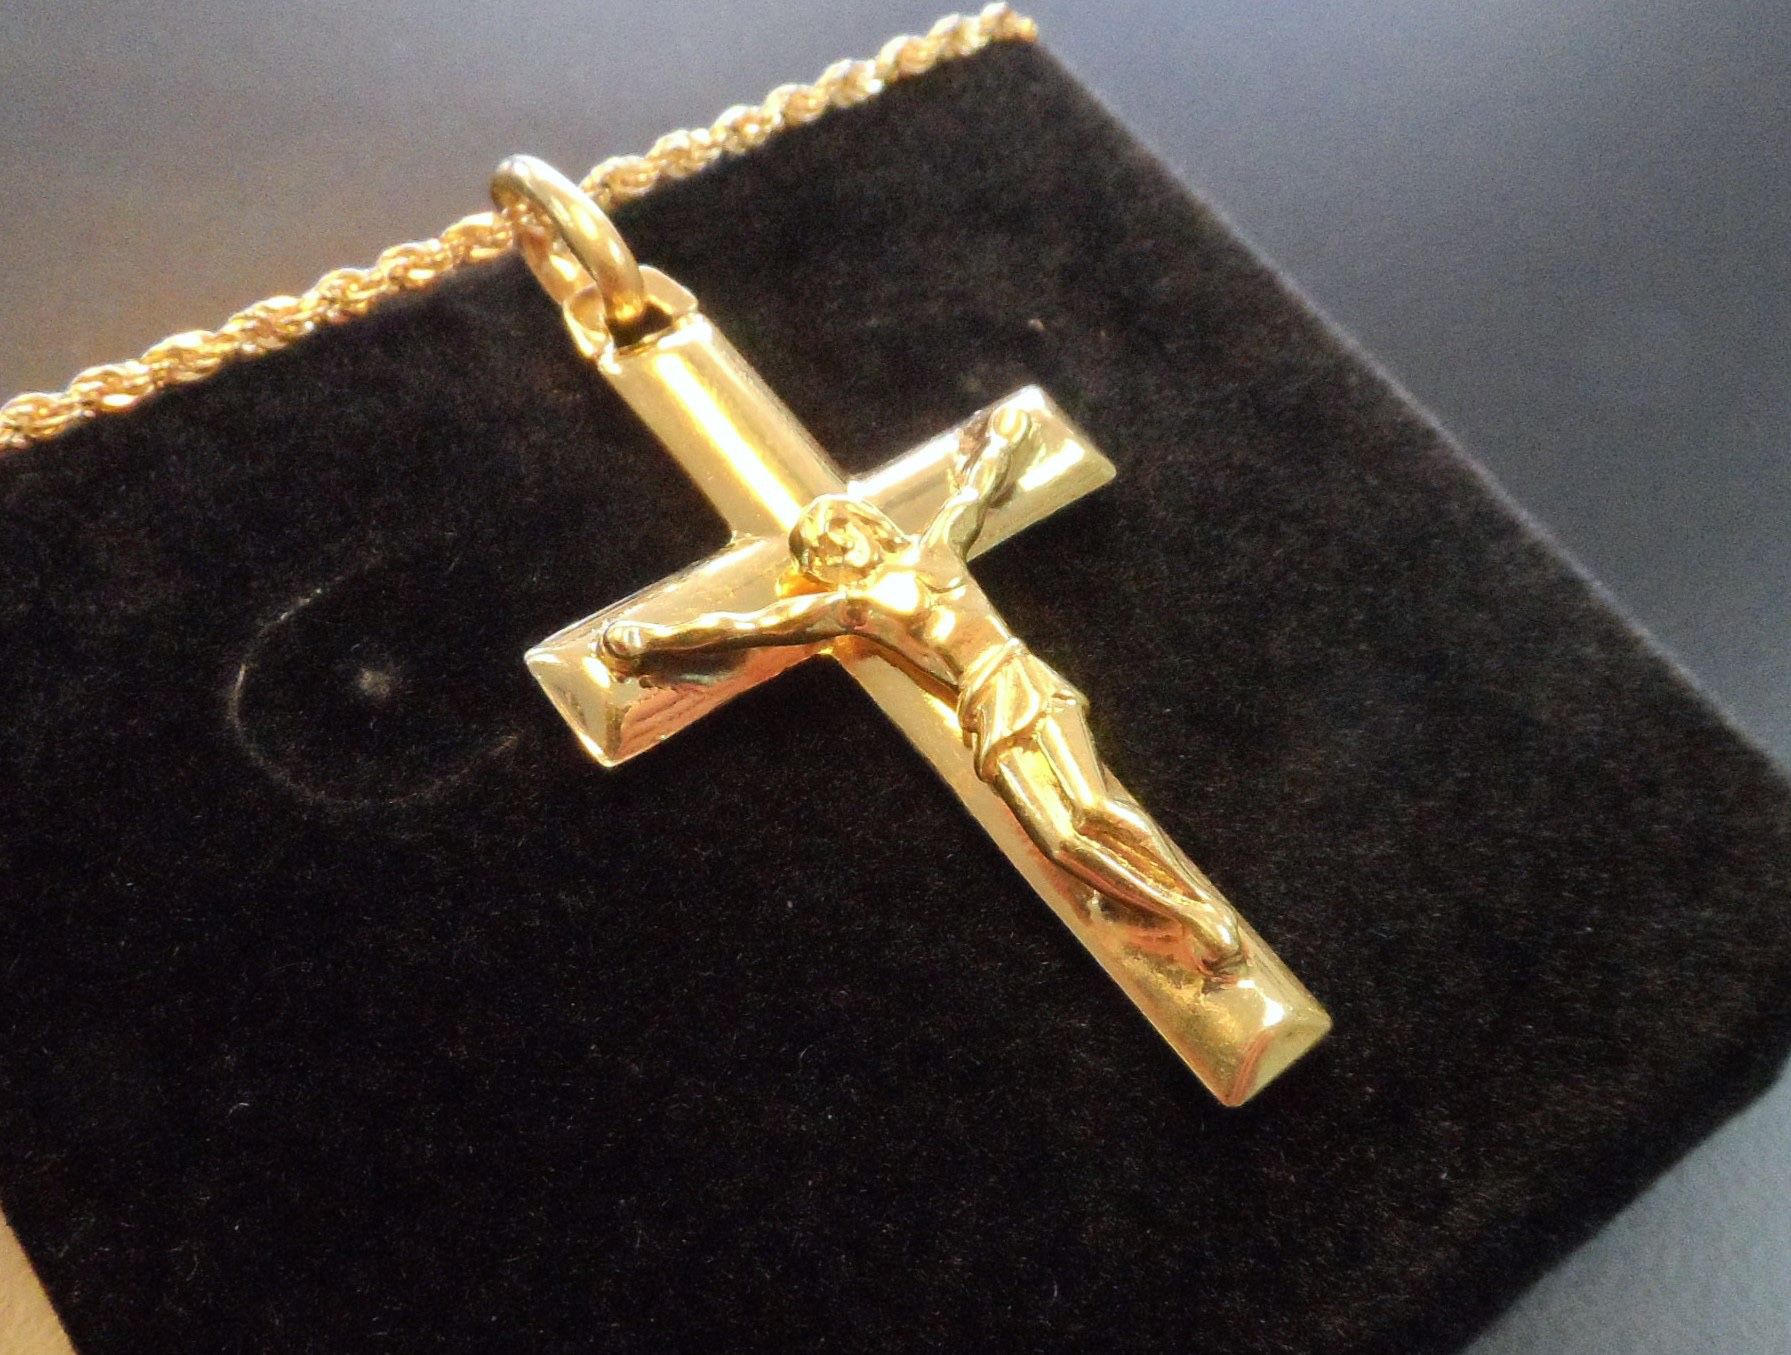 NEW 10K GOLD CROSS PENDANT WITH CHAIN